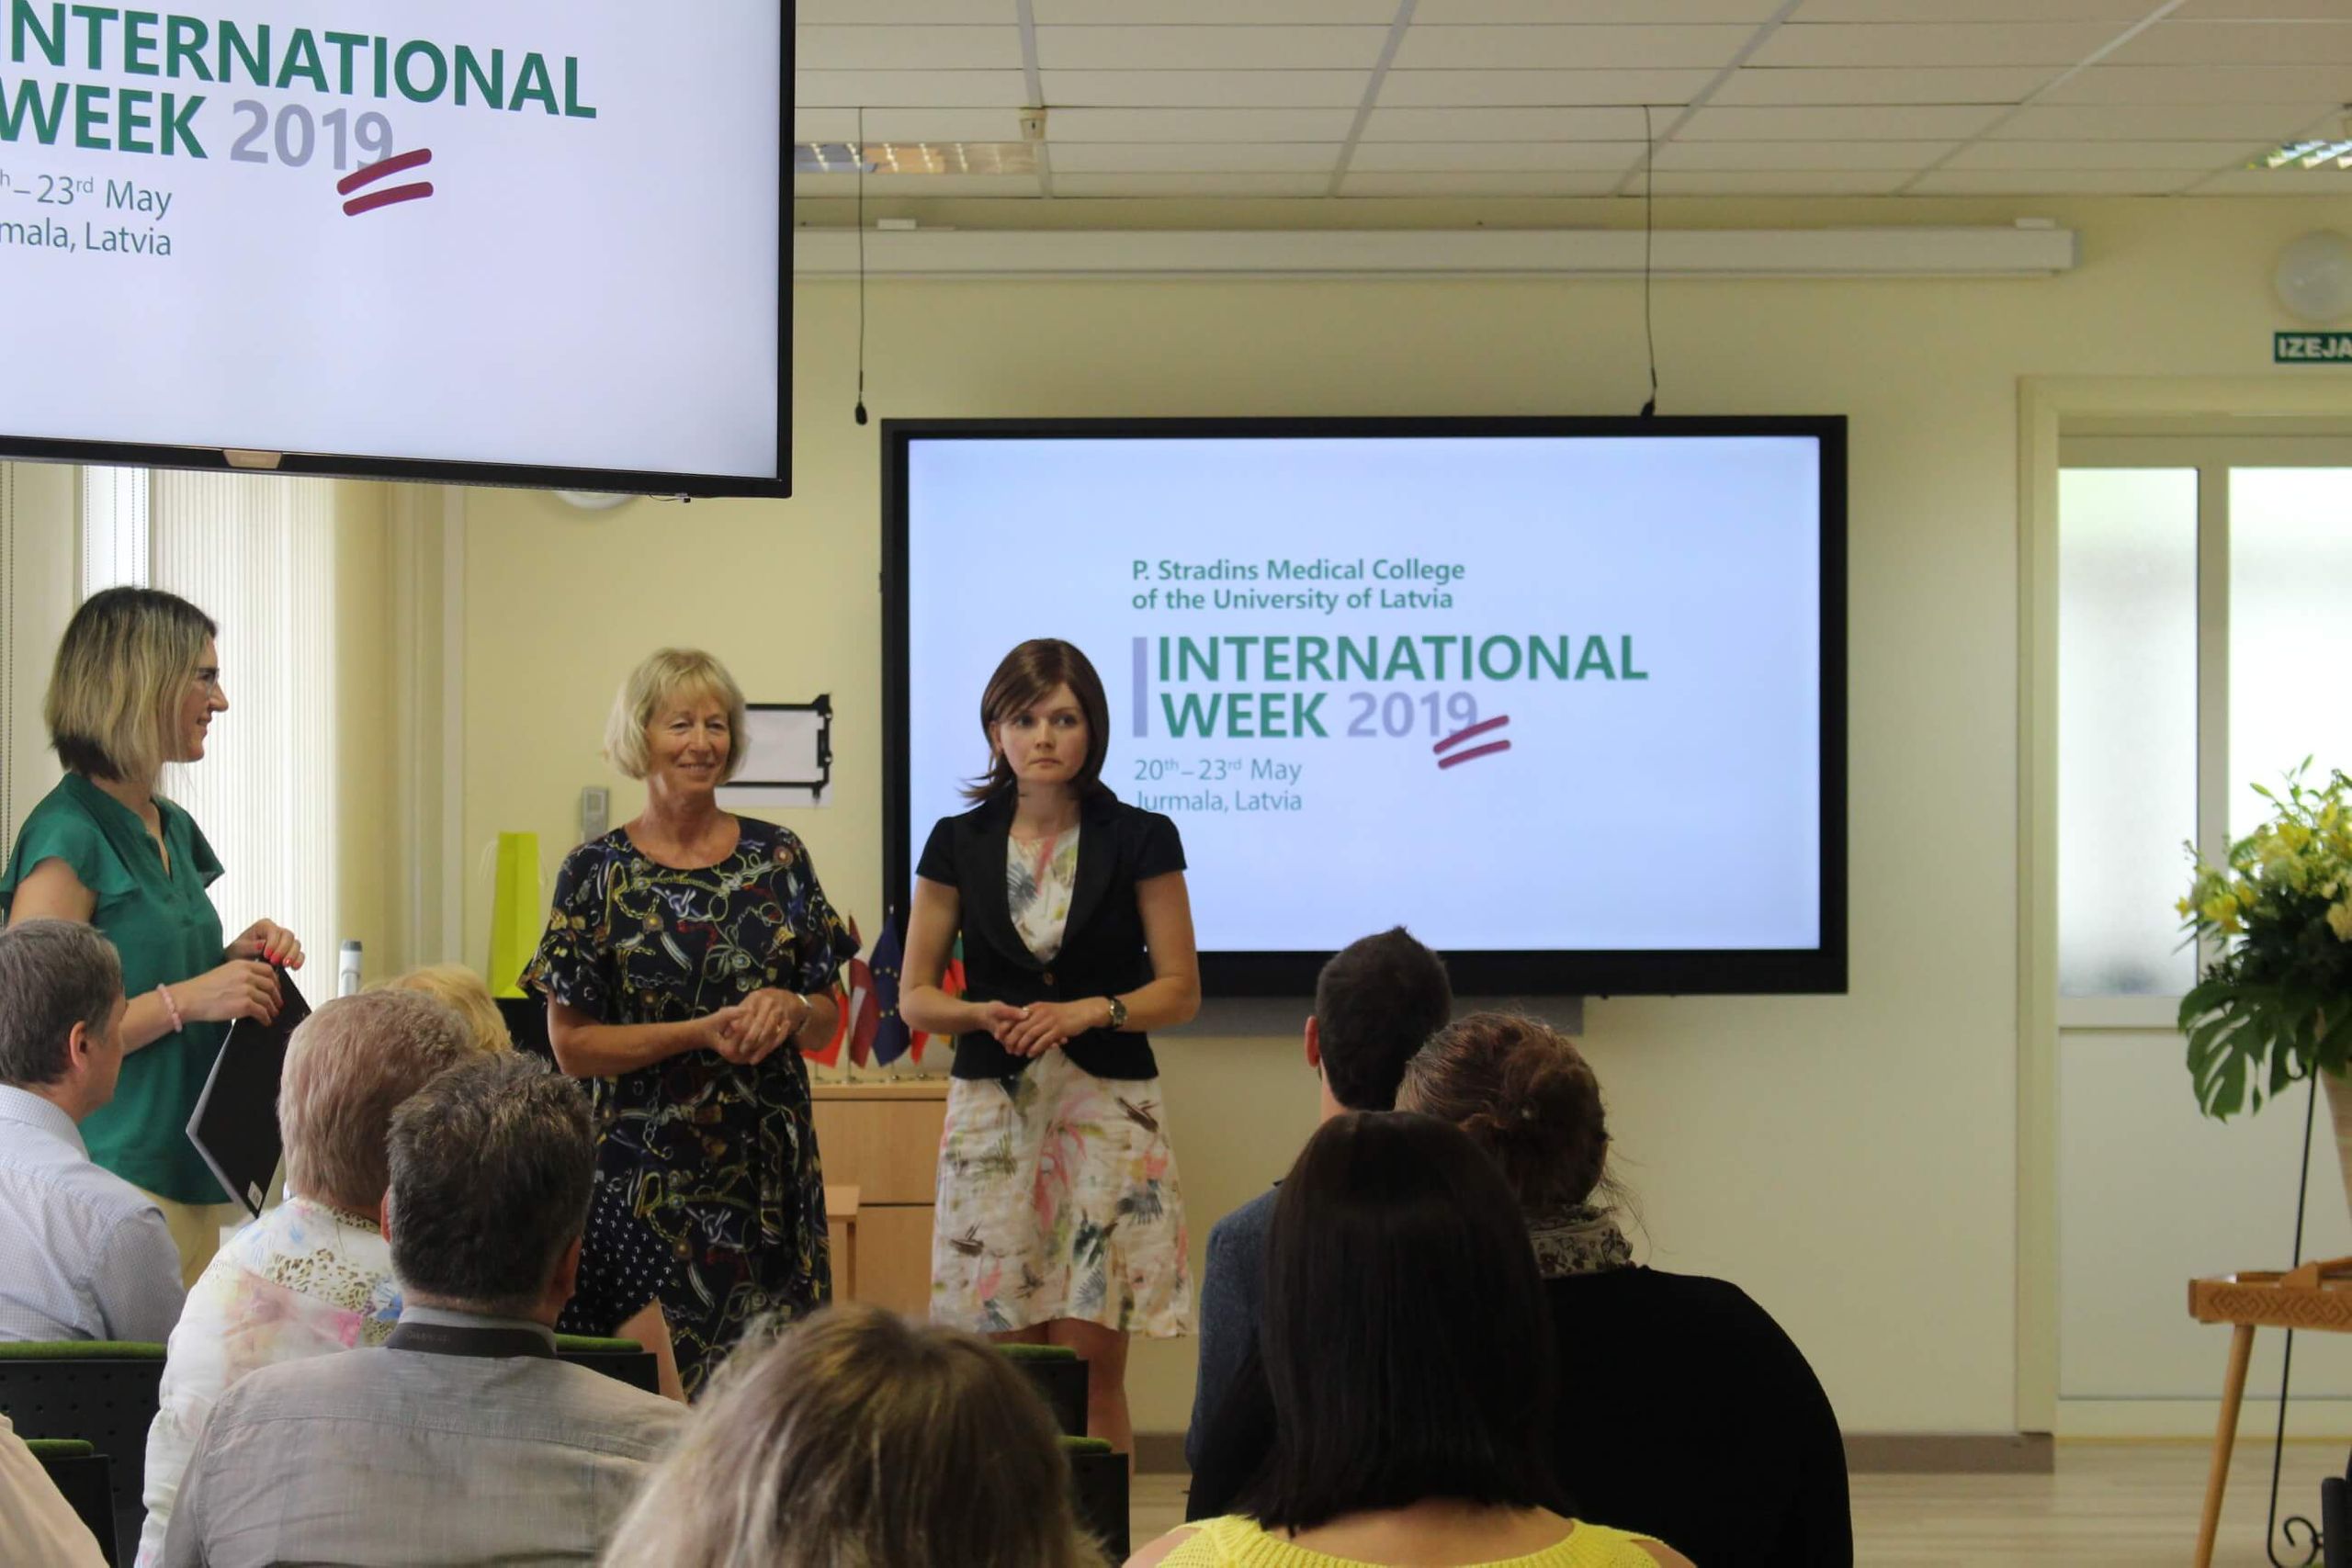 The 2nd International week at P. Stradins Medical College of the University of Latvia